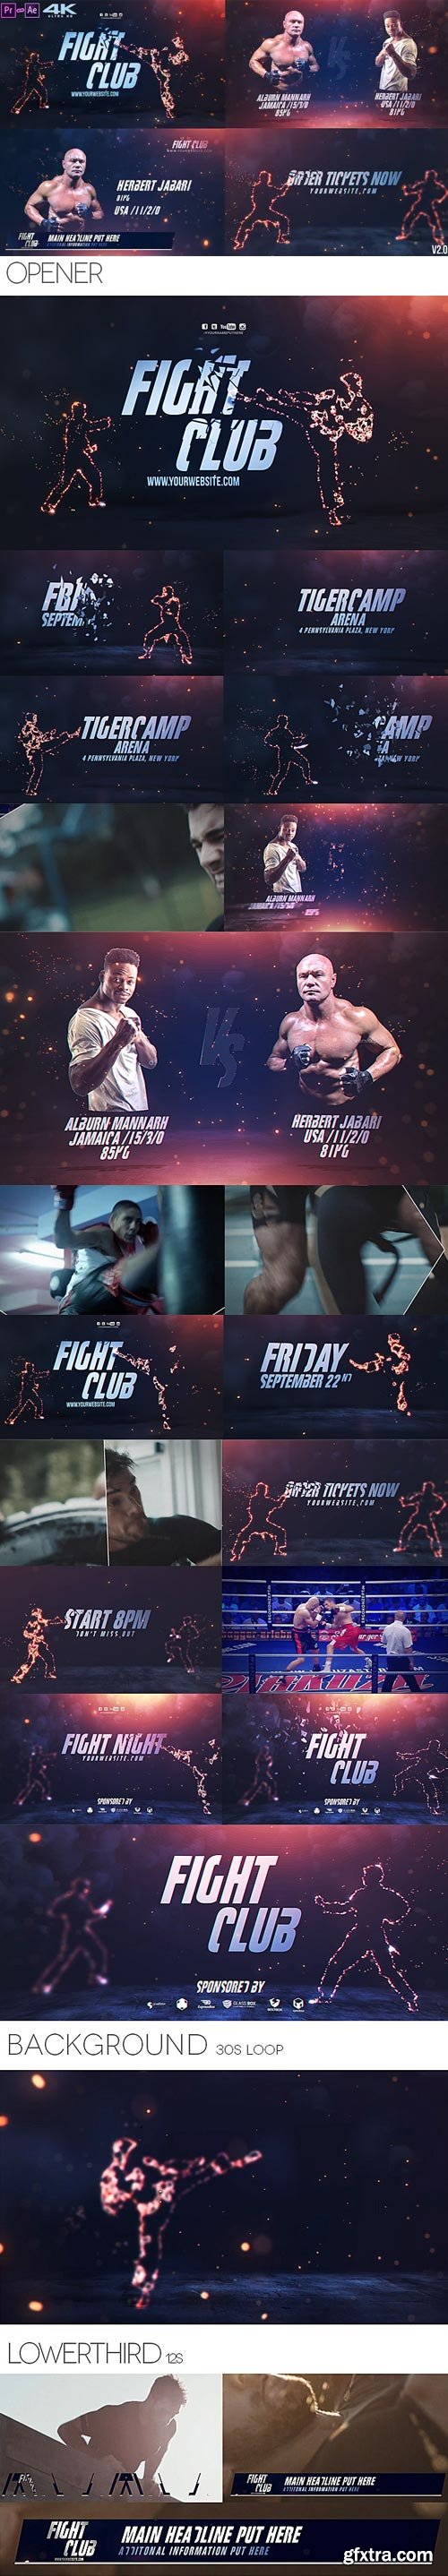 Videohive - Fight Club Broadcast Pack v2 - 20617589